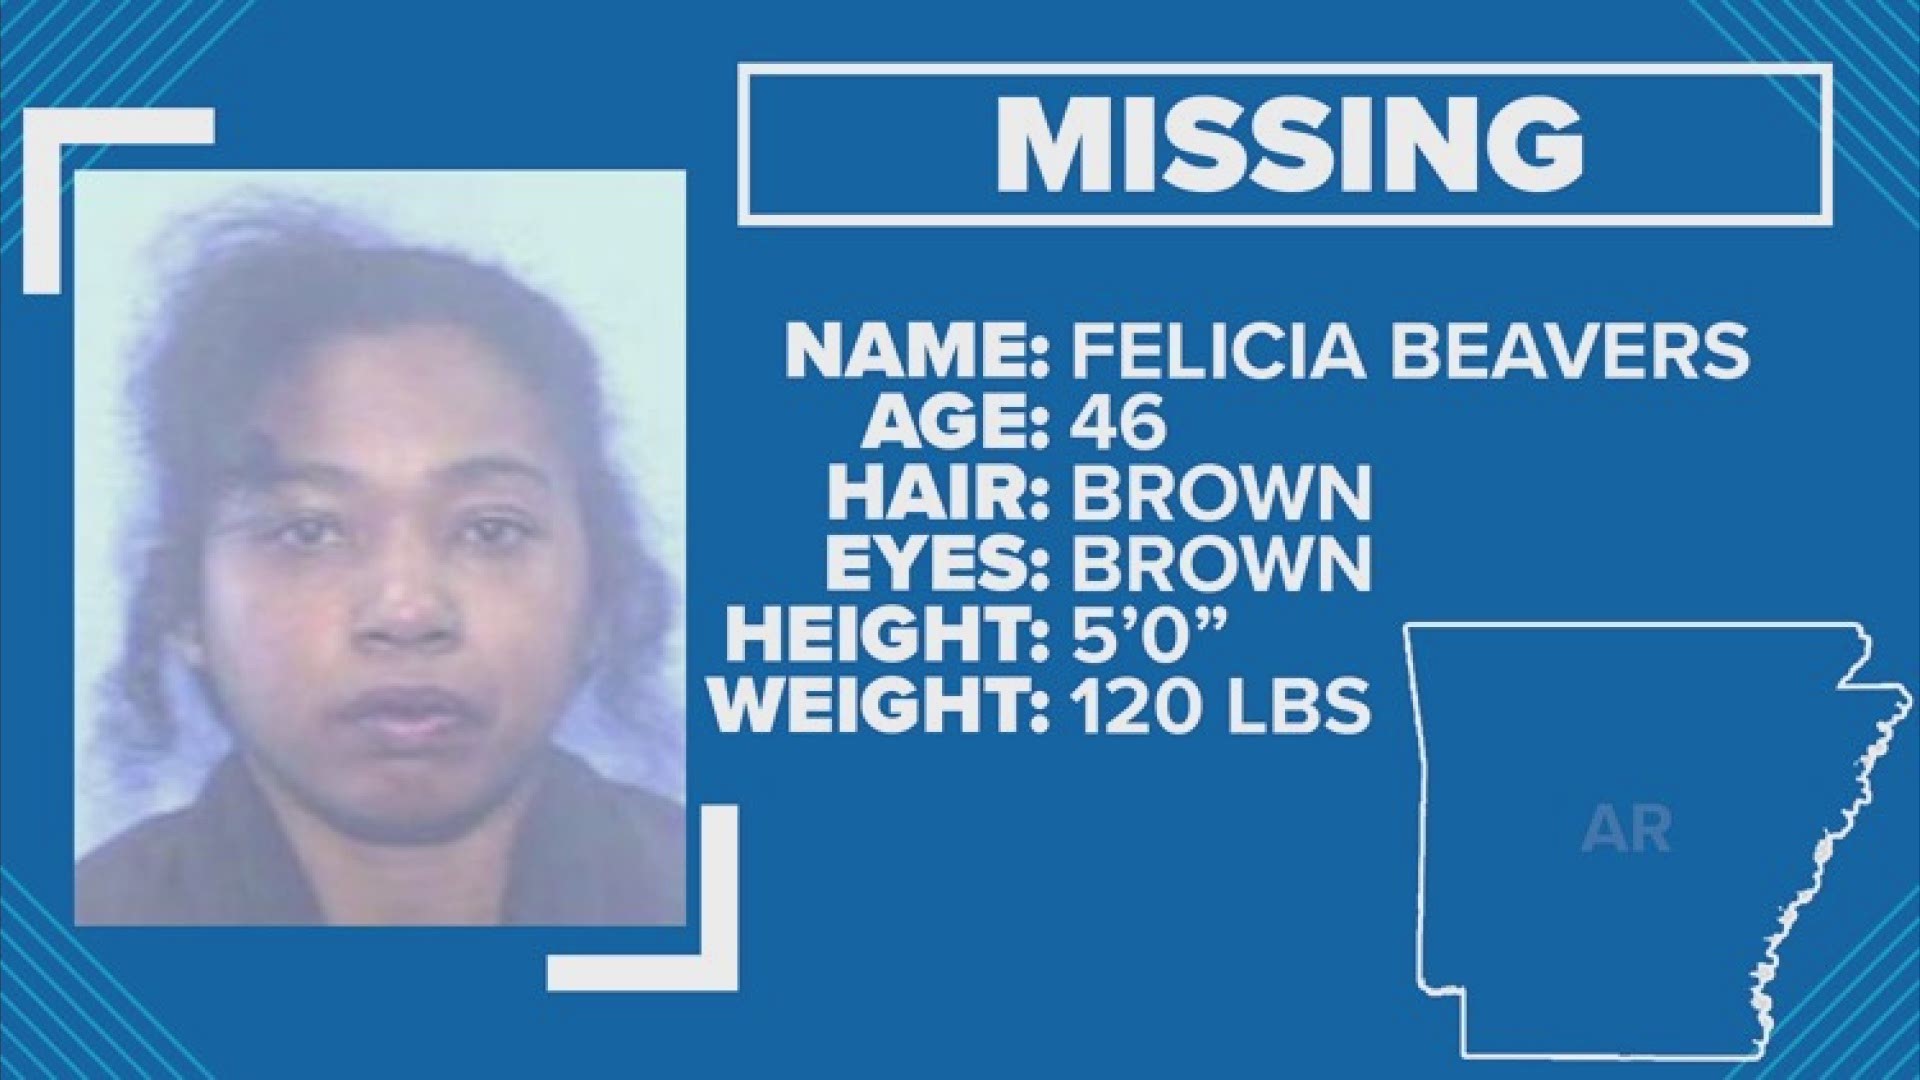 A homeless woman is missing from Little Rock.